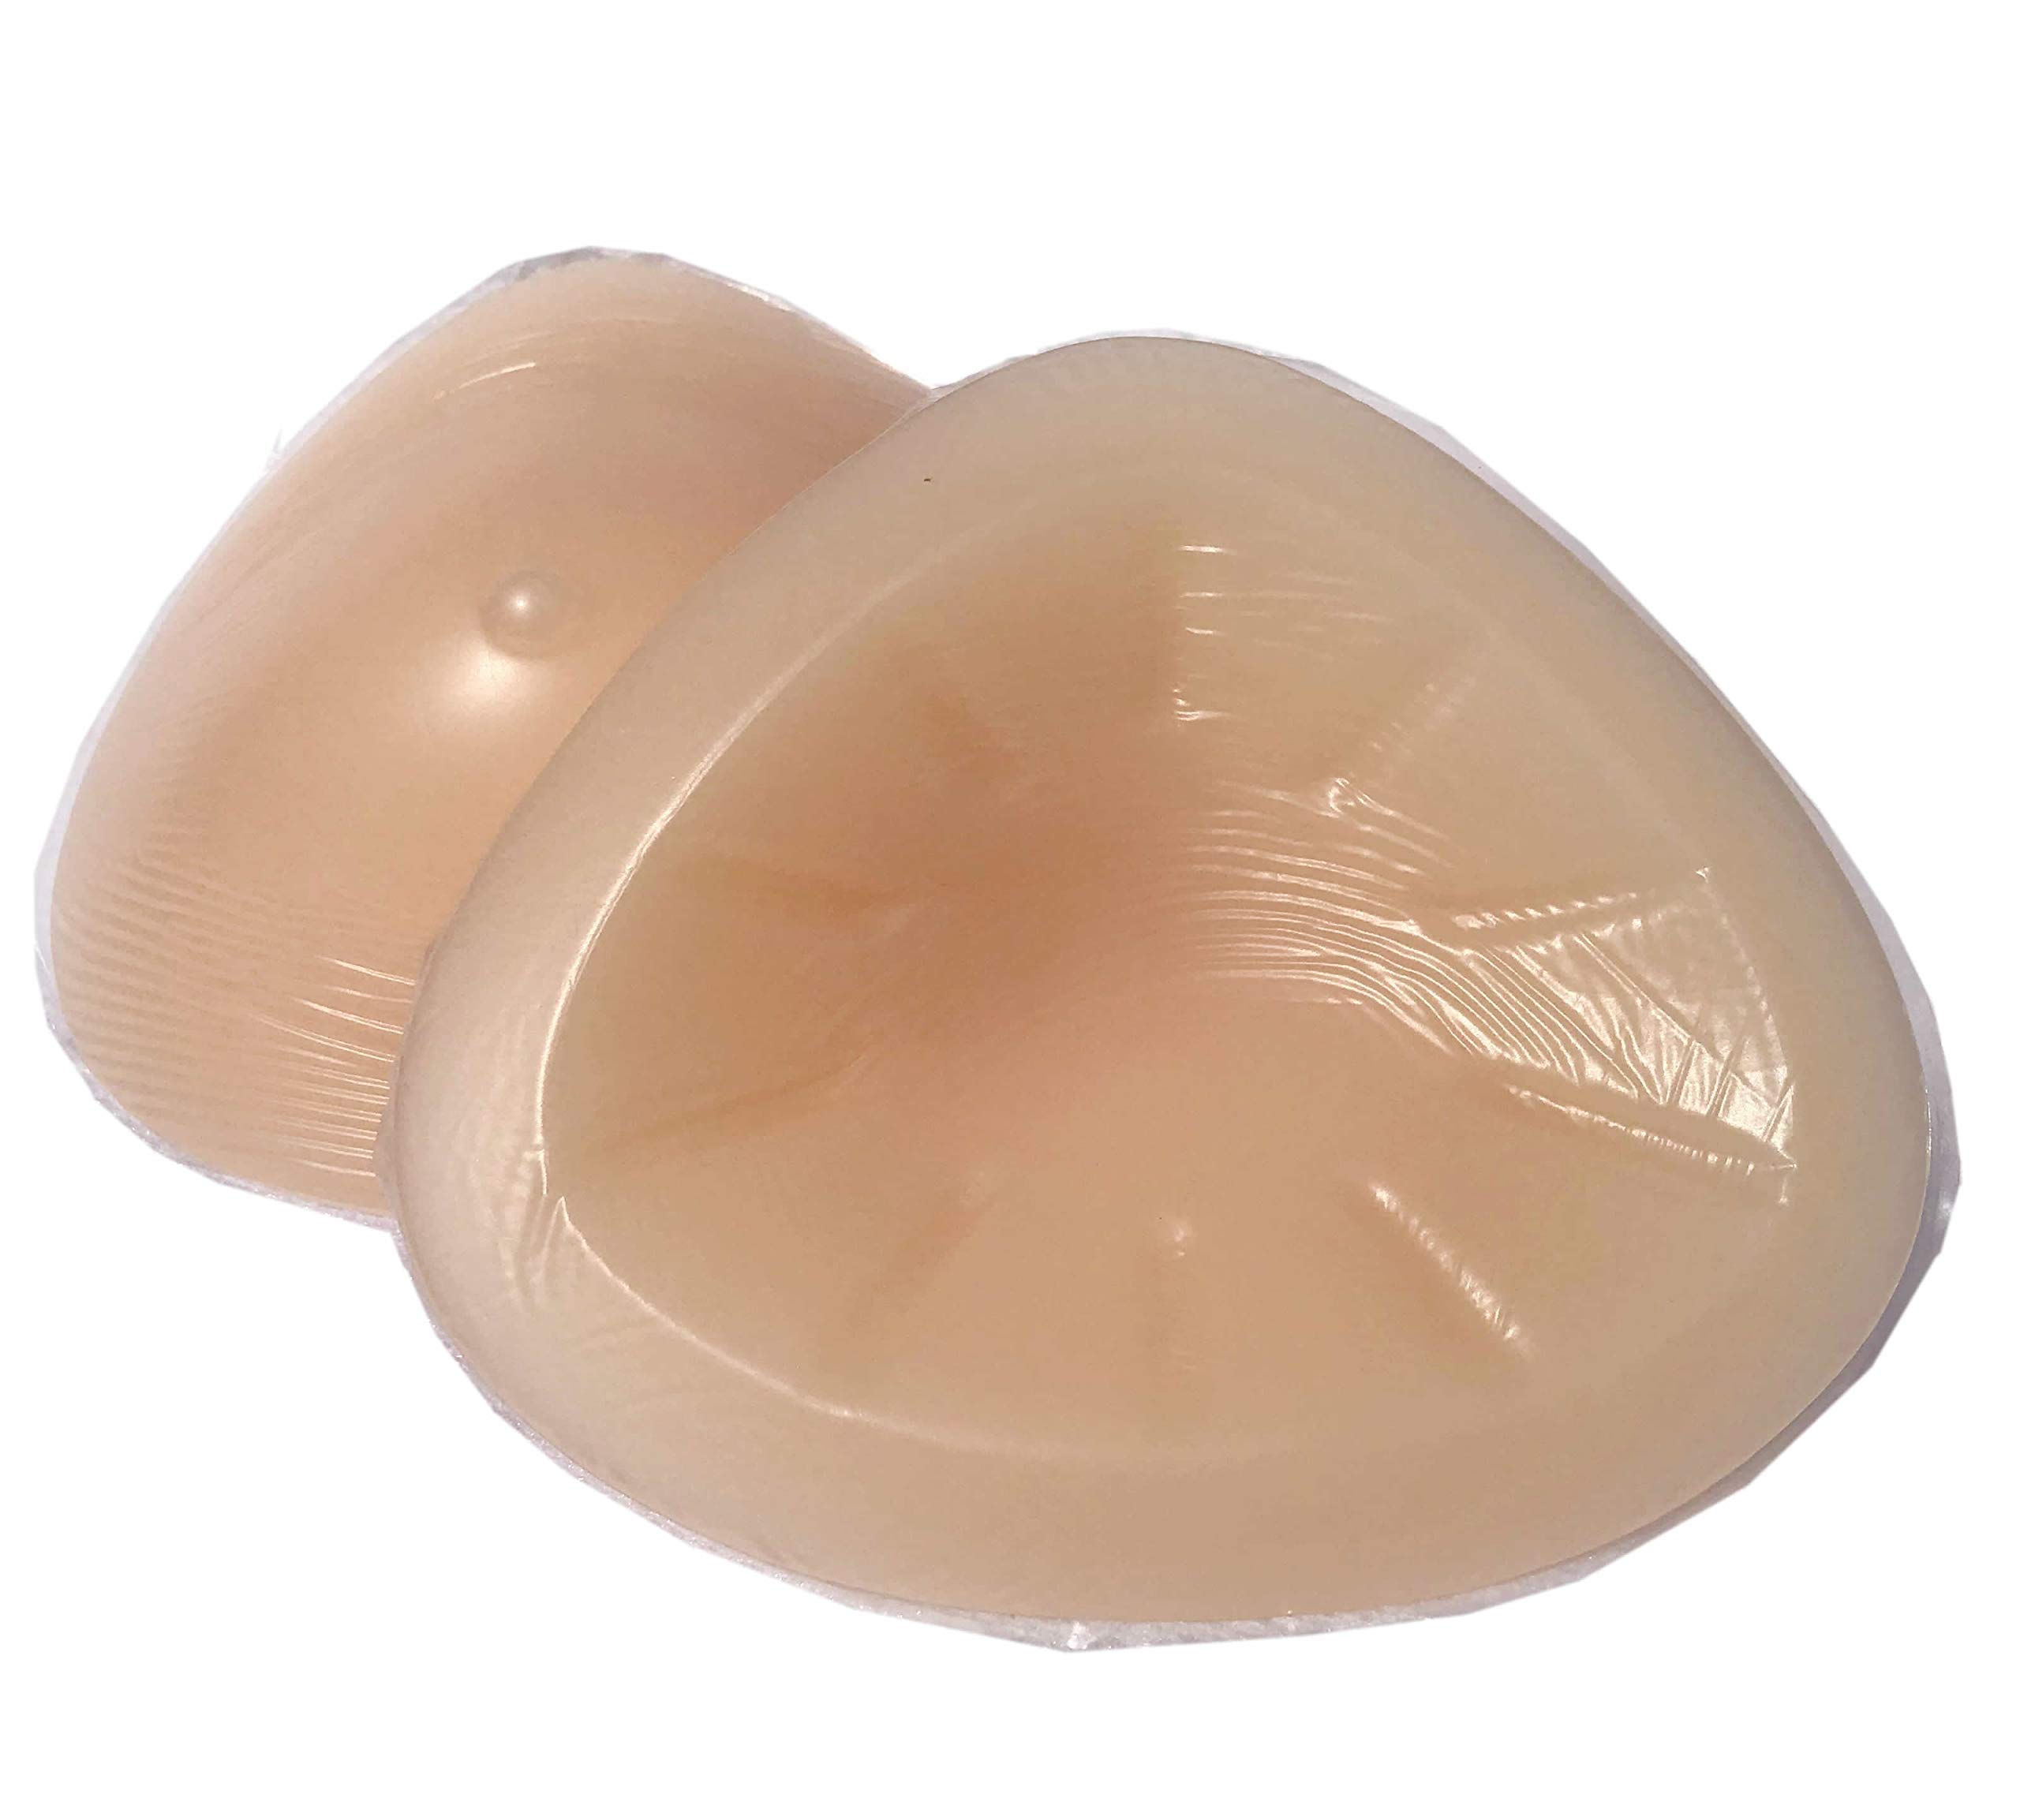 Silicone Breast Form Woman Mastectomy Prosthesis Bra Enhancer Inserts 1 Pair (1000g/Pair (D Cup)) Beige